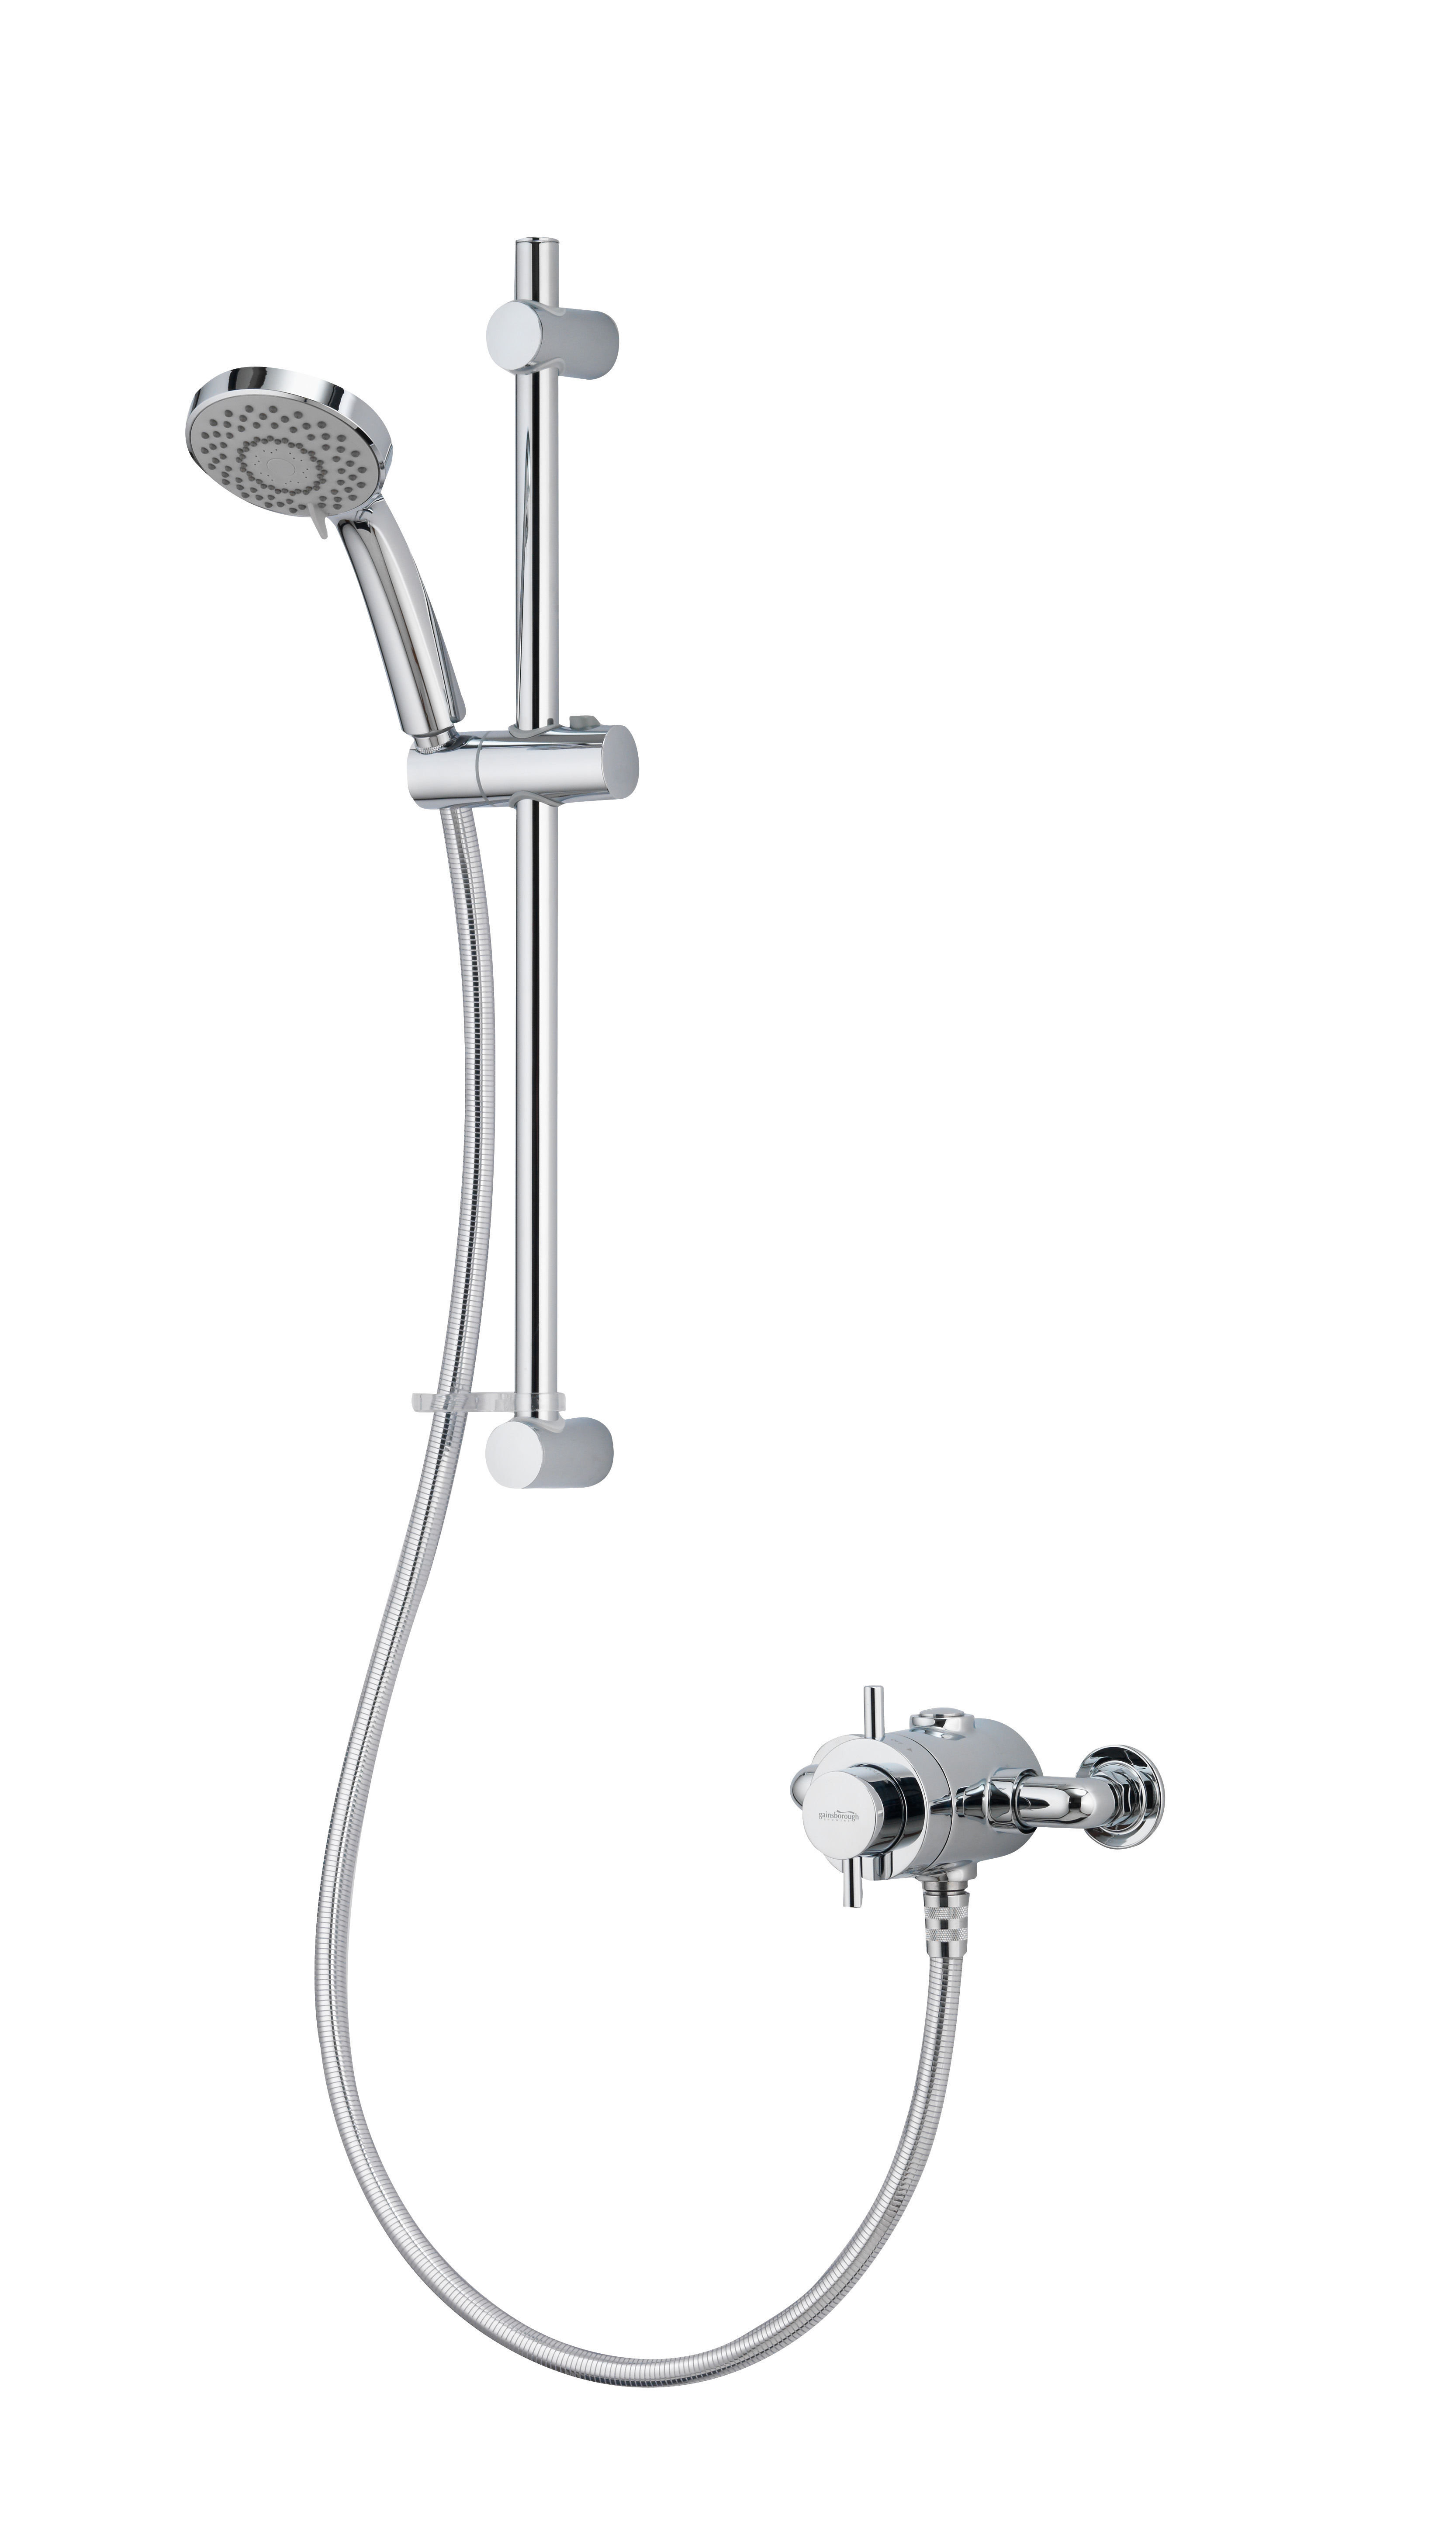 GT550 Exposed Mixer Shower - now just £159.99